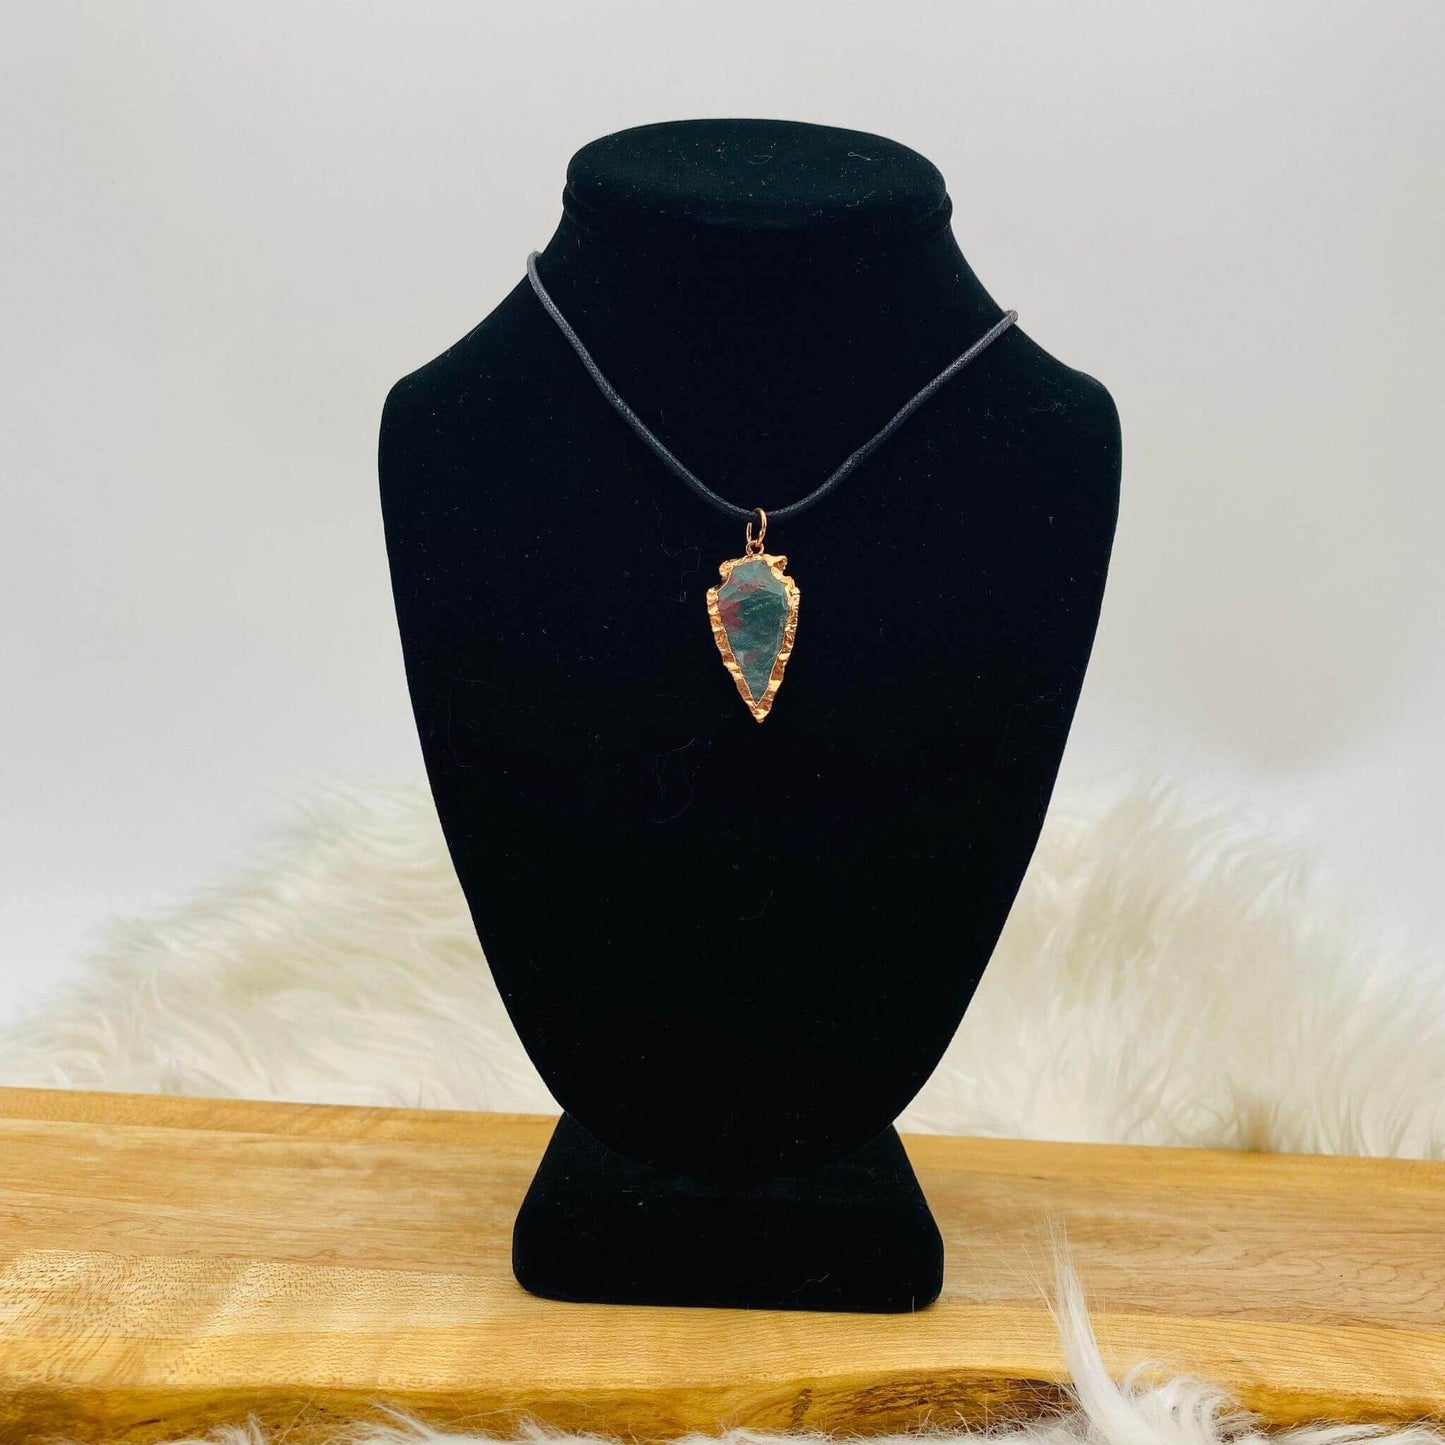 Bloodstone Arrowhead Necklace at $25 only from Spiral Rain